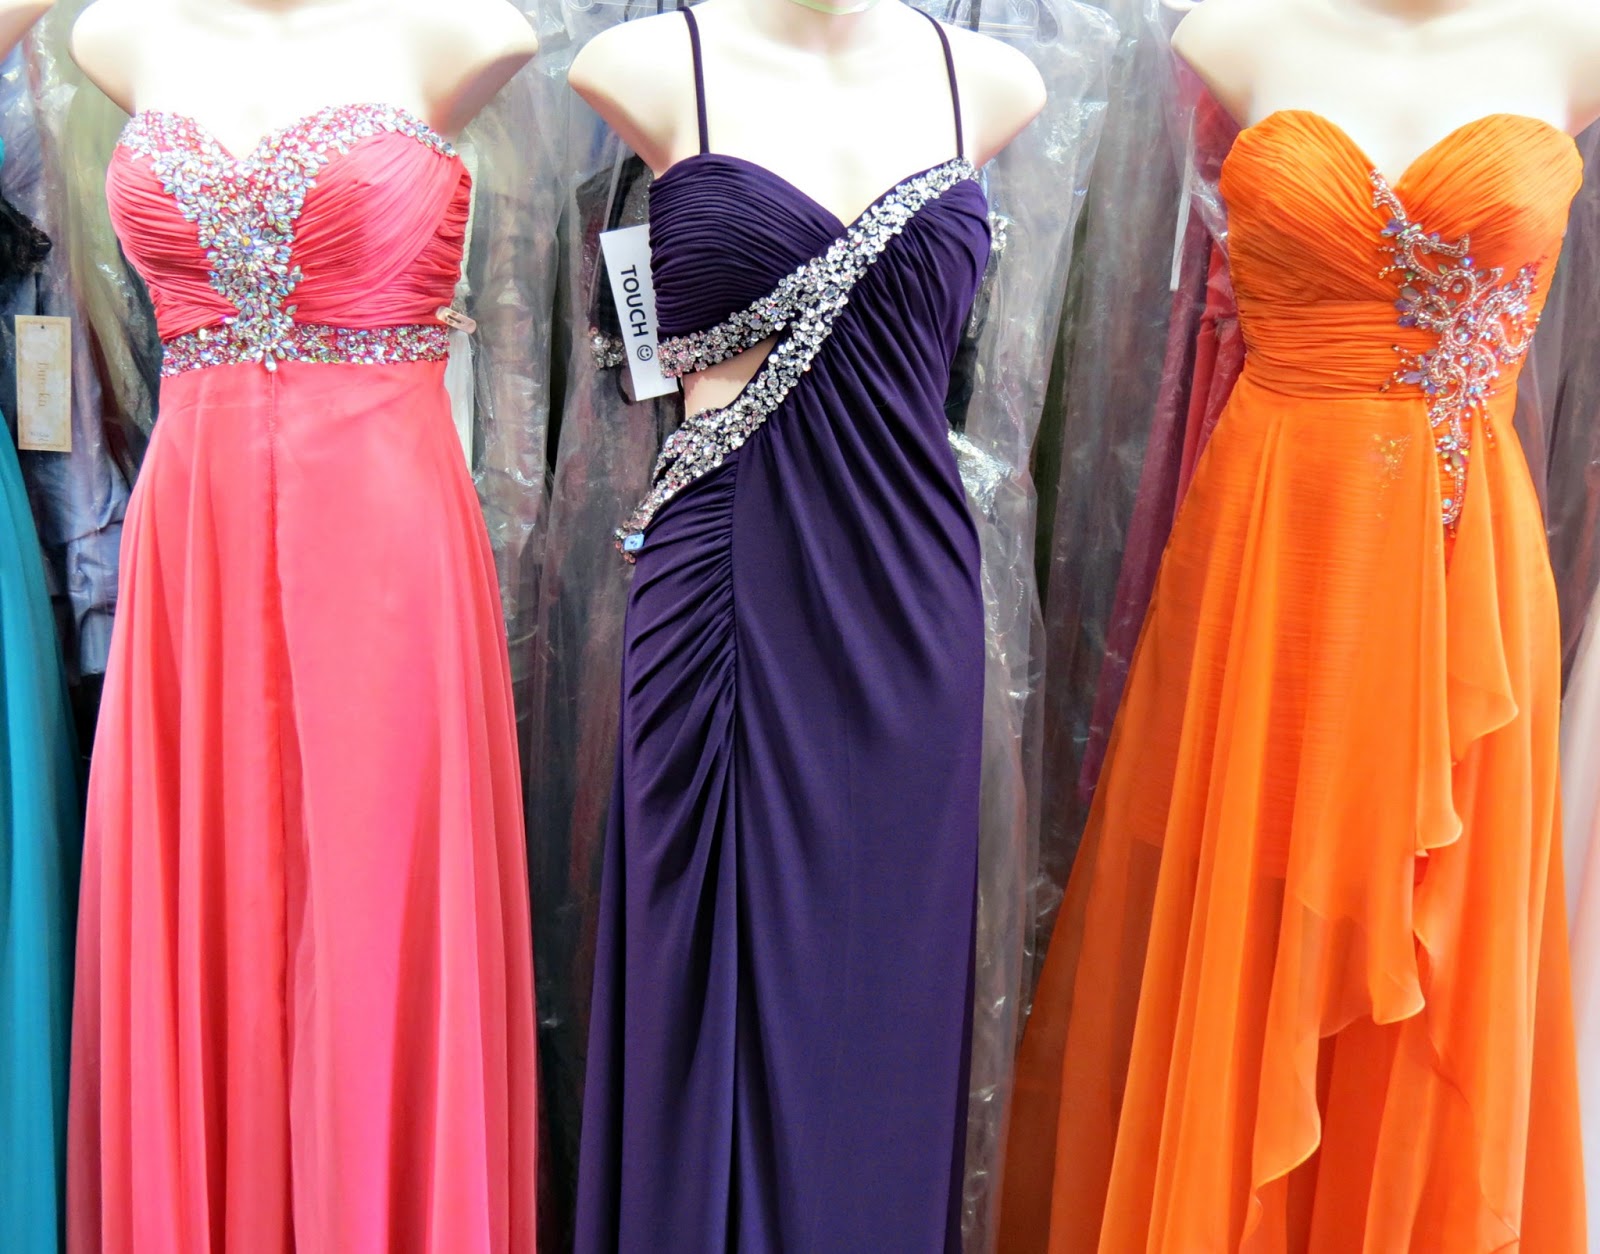 ... for a prom dress or special occasion dress to check out this store